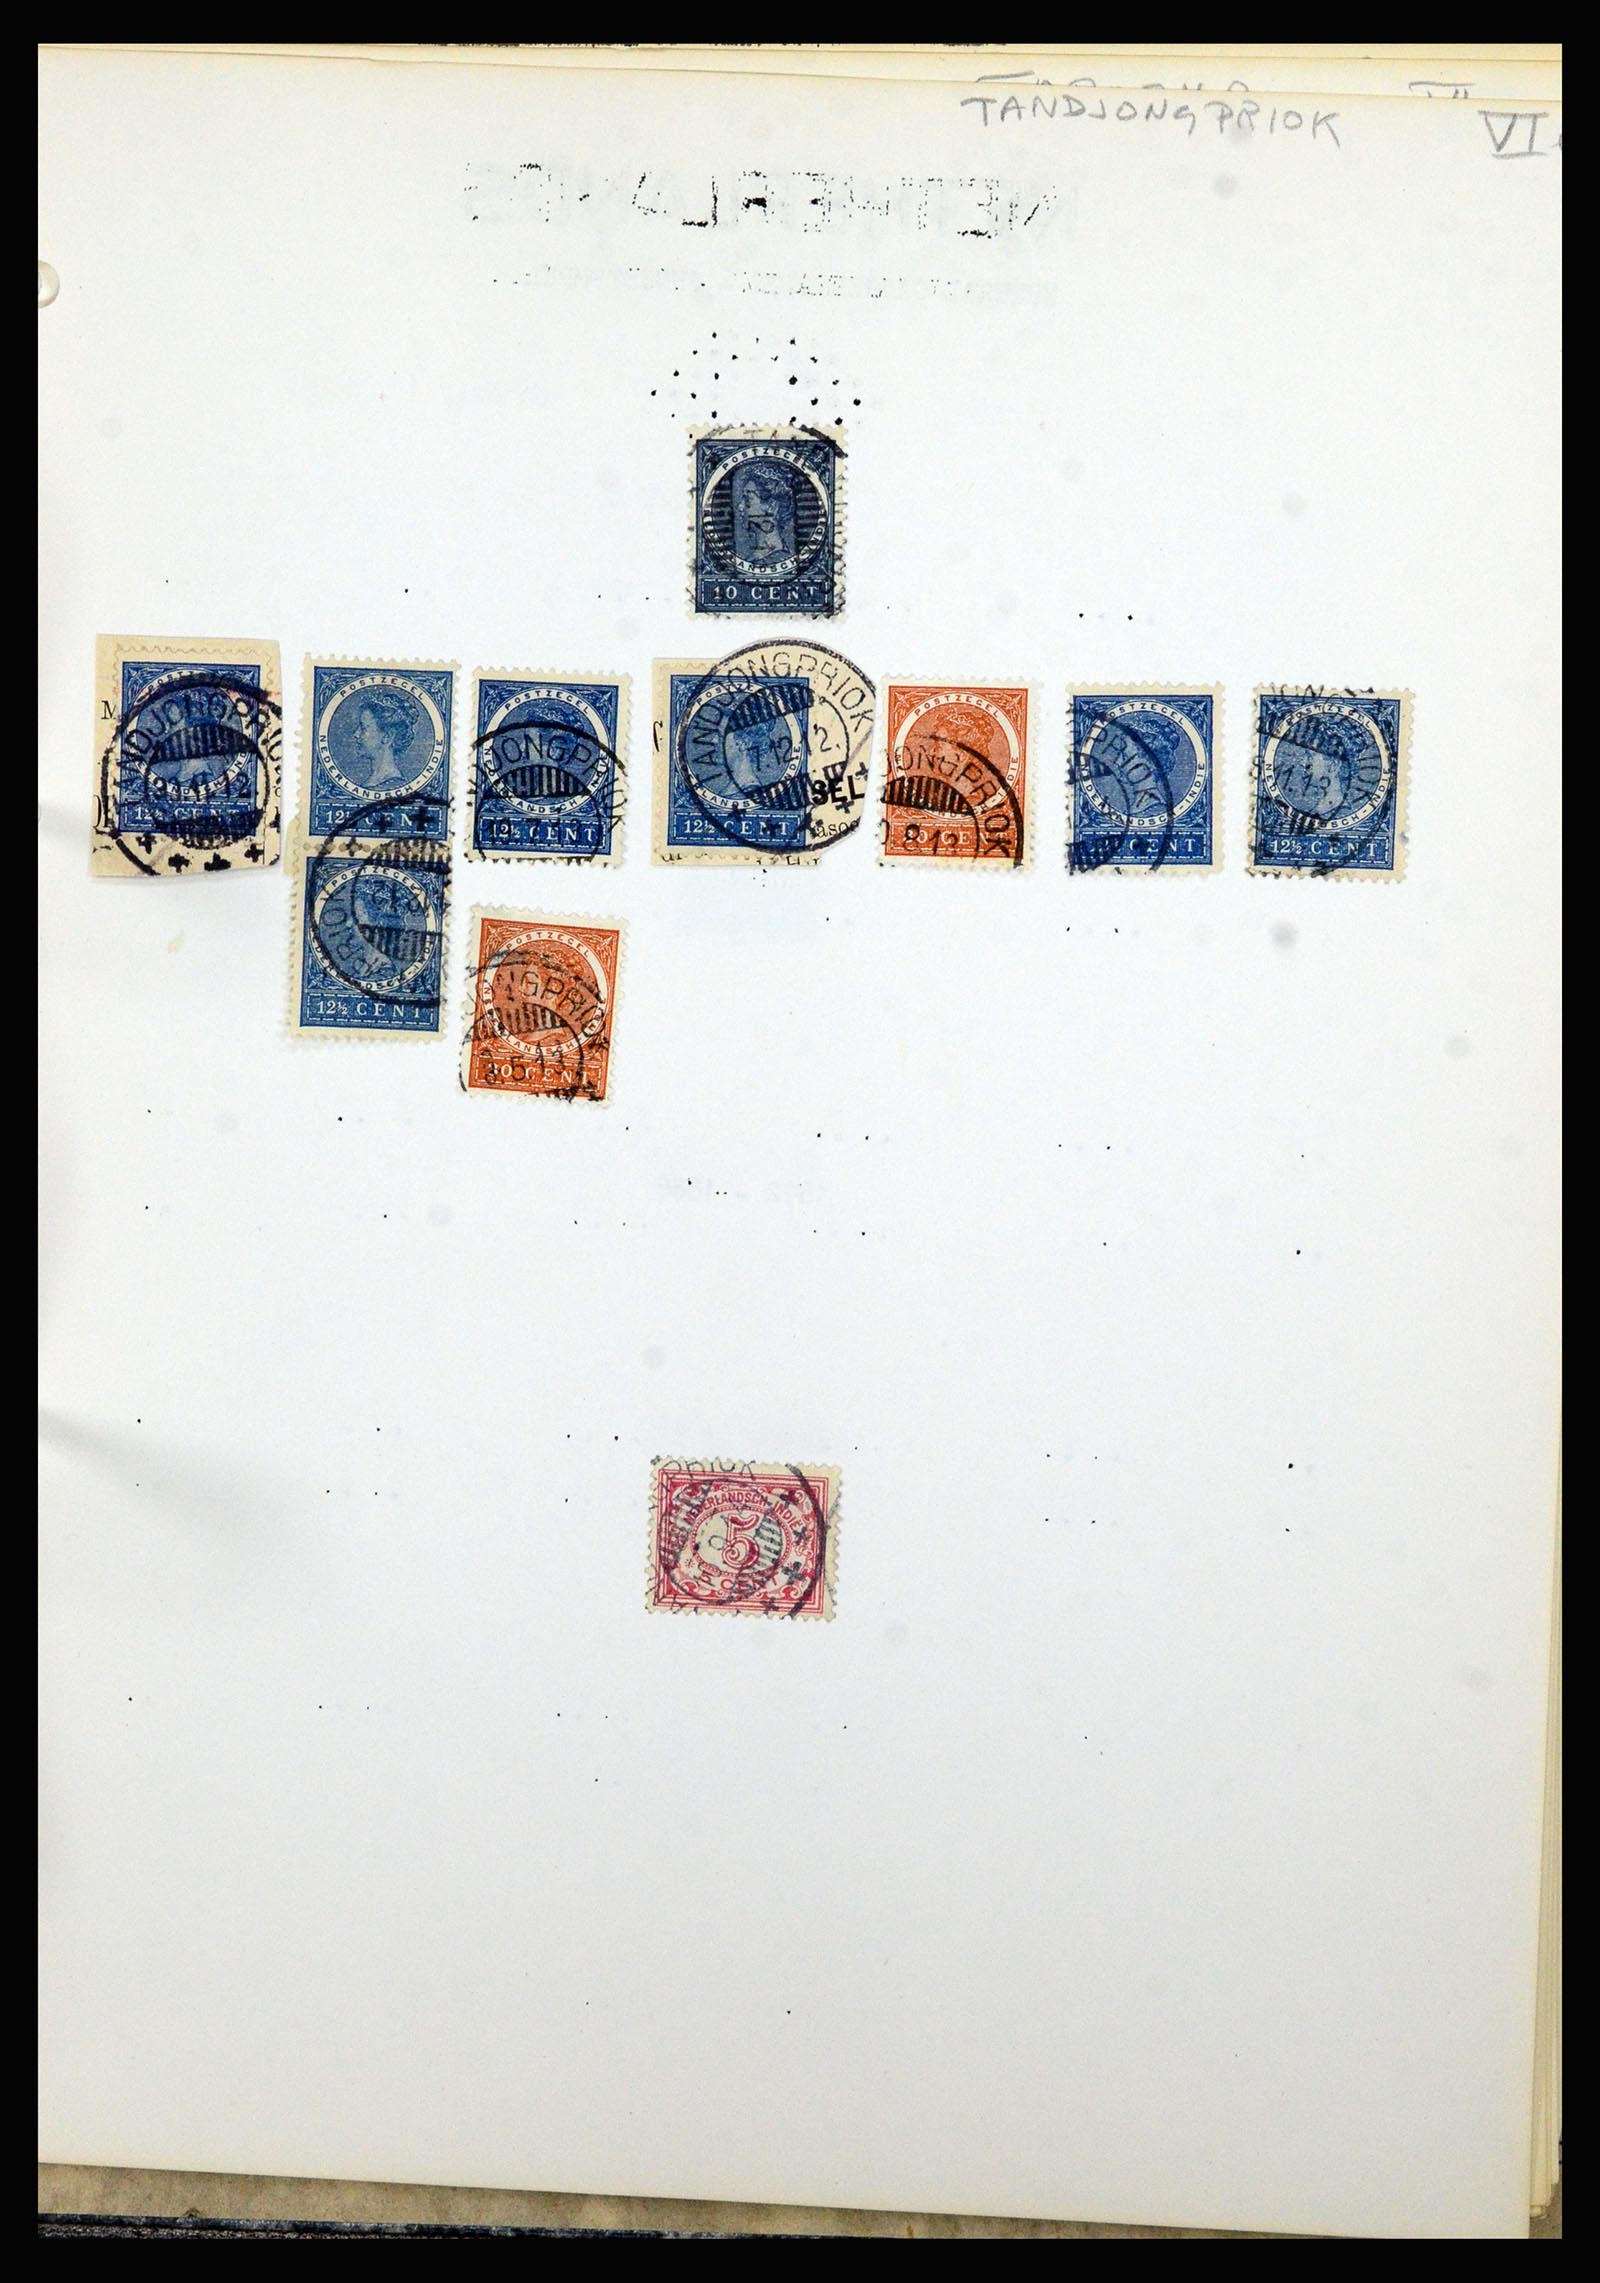 36841 153 - Stamp collection 36841 Dutch east Indies short bar cancels.